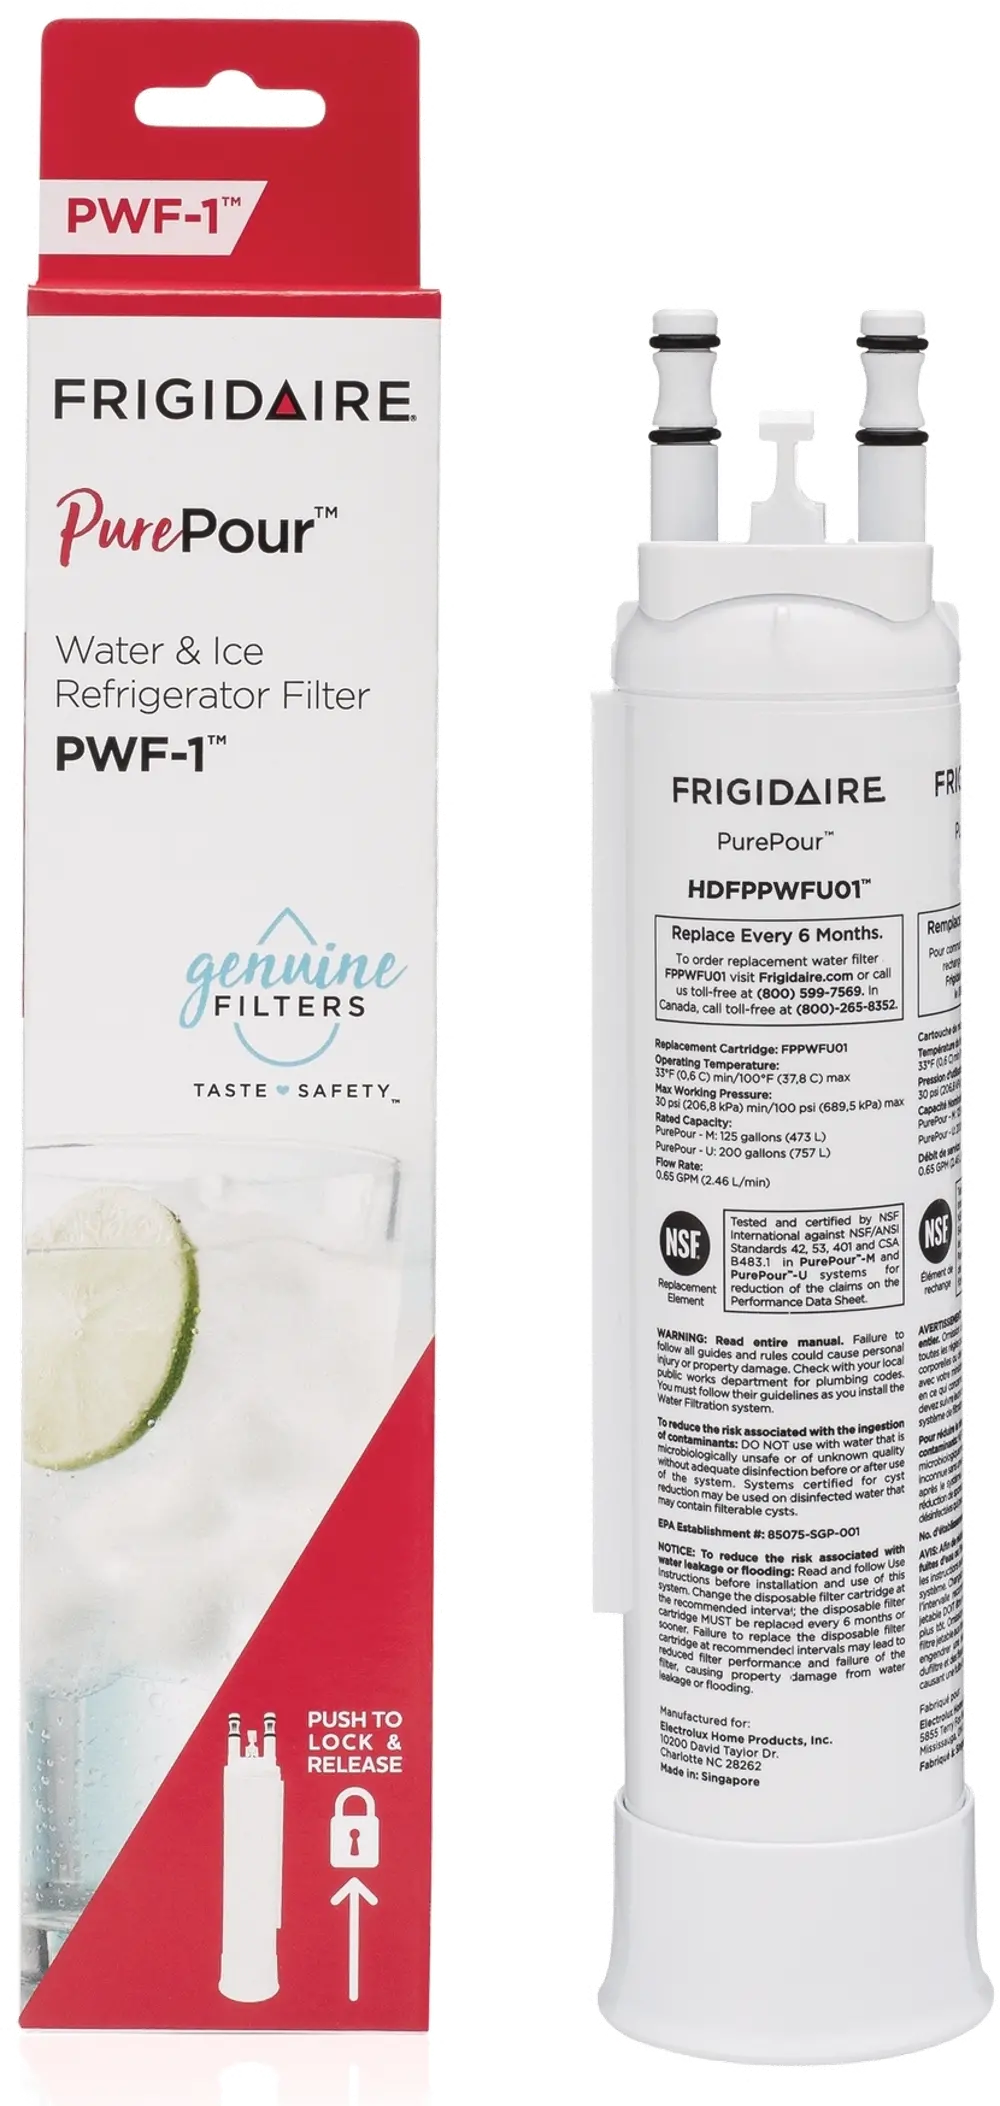 FPPWFU01 Frigidaire Water Filter Replacement, FPPWFU01-1